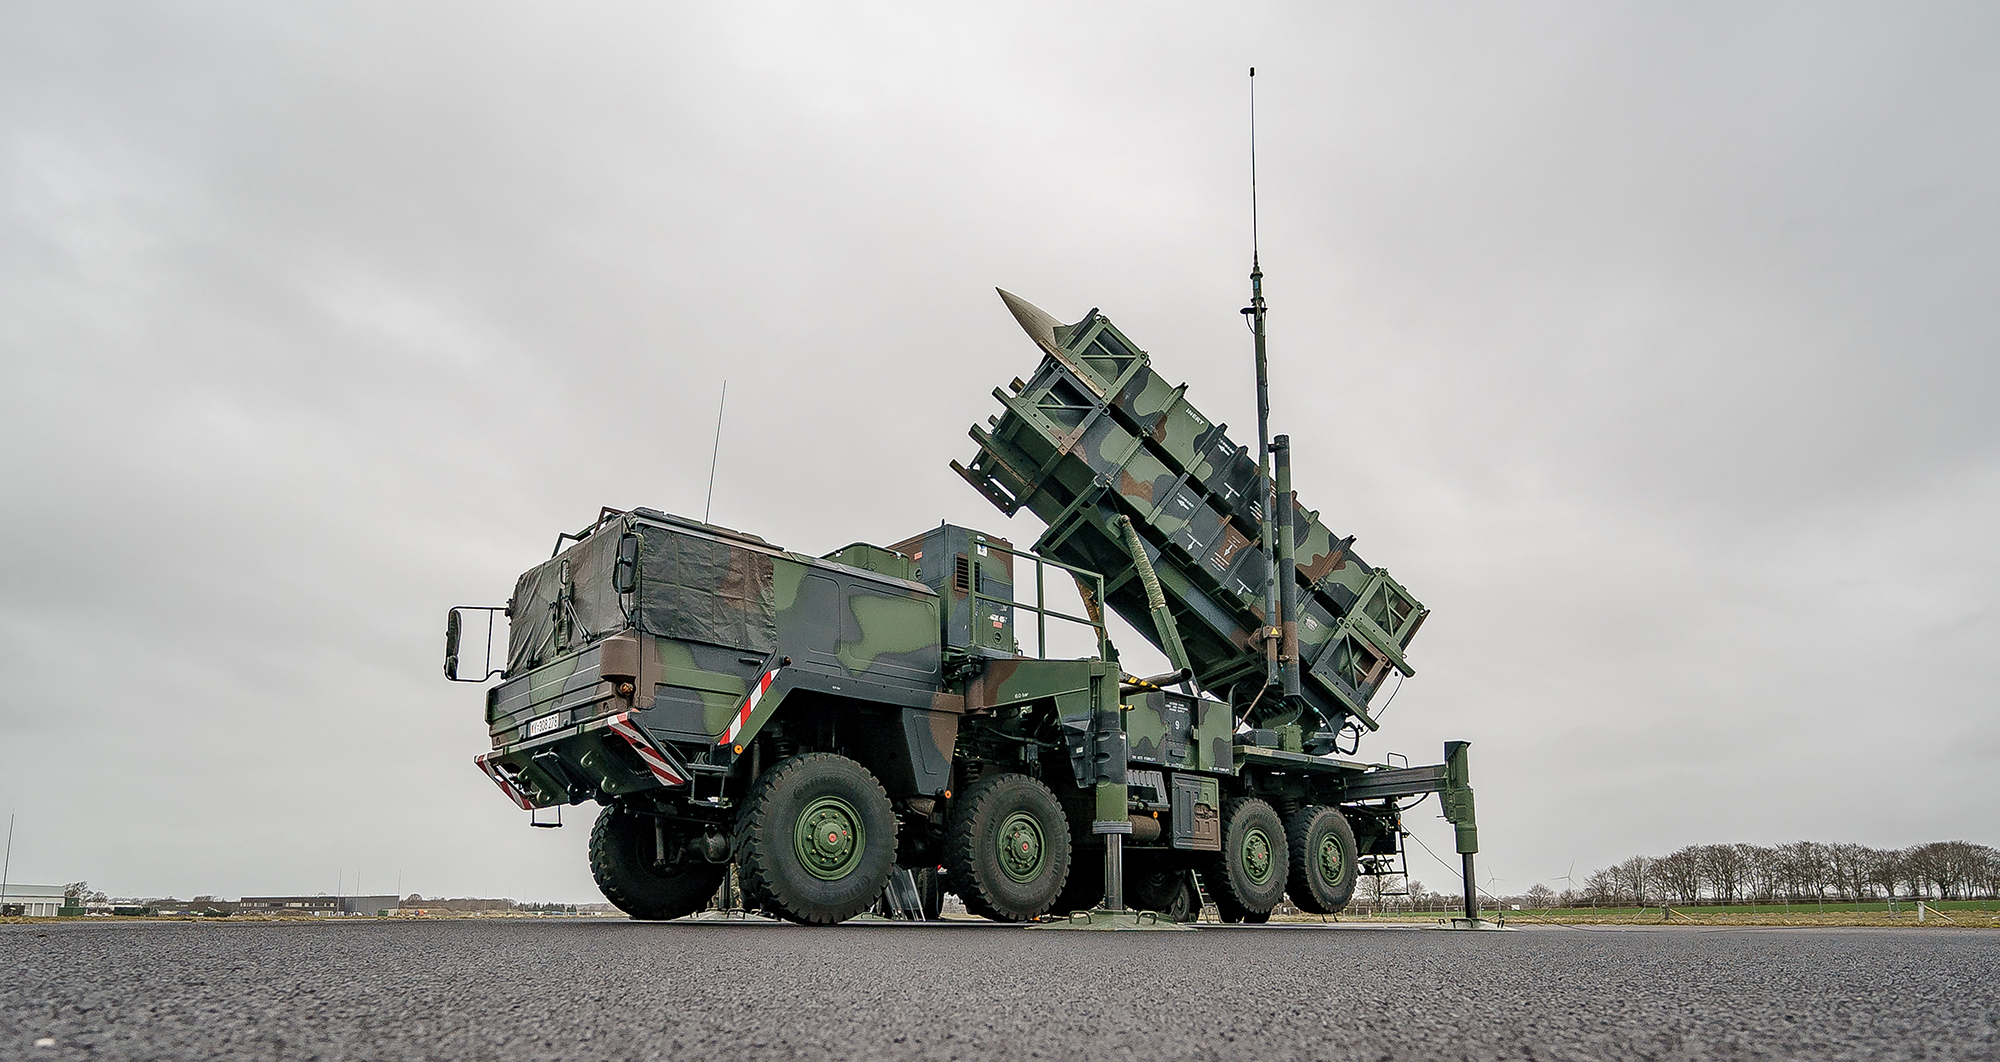 A combat-ready Patriot anti-aircraft missile system of the Bundeswehr's anti-aircraft missile squadron 1 stands on the airfield of Schwesing military airport in Germany on March 17. 